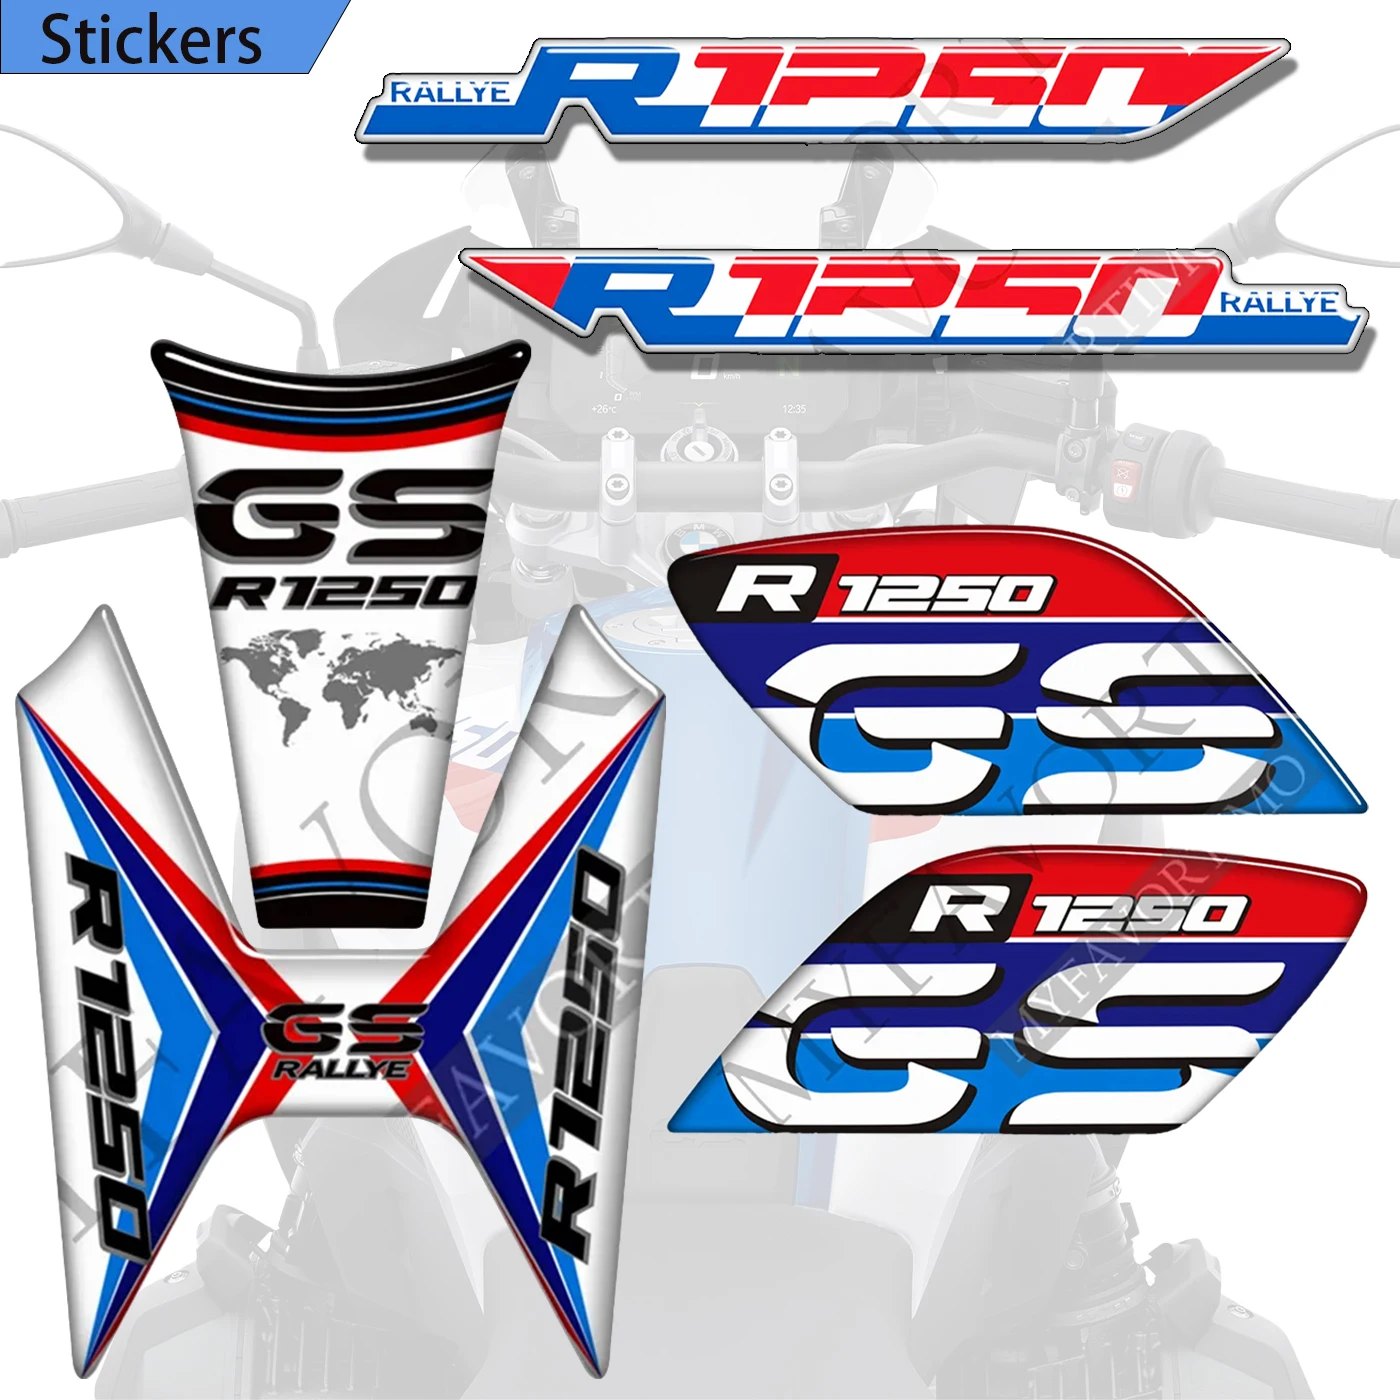 

For BMW R1250GS R1250 R 1250 GS LC HP Rallye 2019-2022 Motorcycle Tank Pad Stickers Decal Rally Fairing Fender